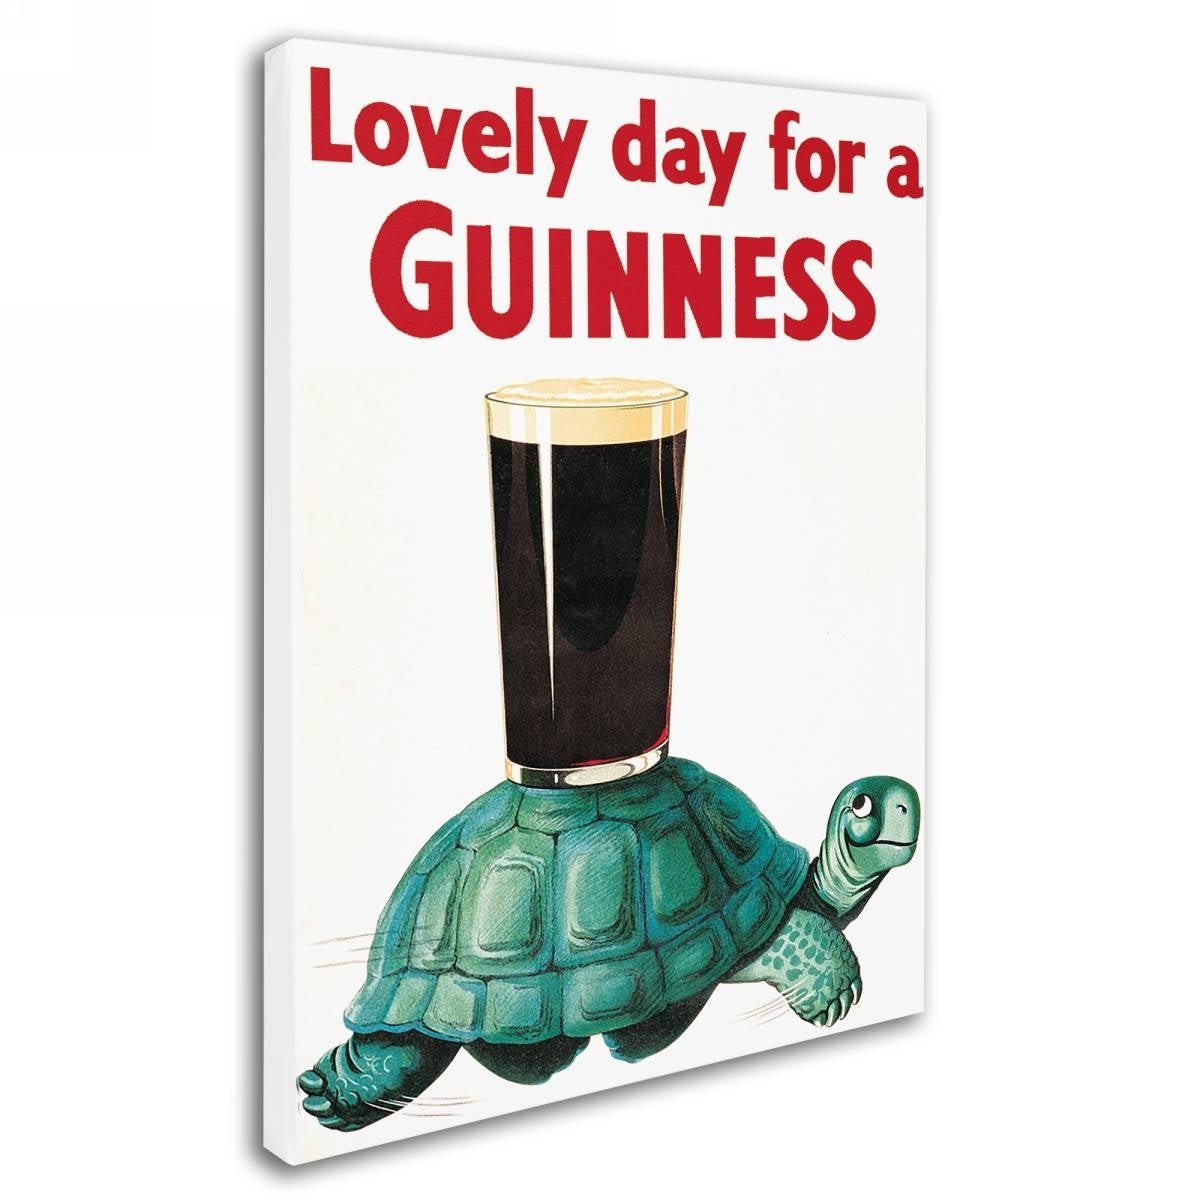 Lovely day for a Guinness. A remarkable art piece showcasing the Guinness Brewery 'Lovely Day For A Guinness X' Canvas Art, one of the finest beer brands in the world.